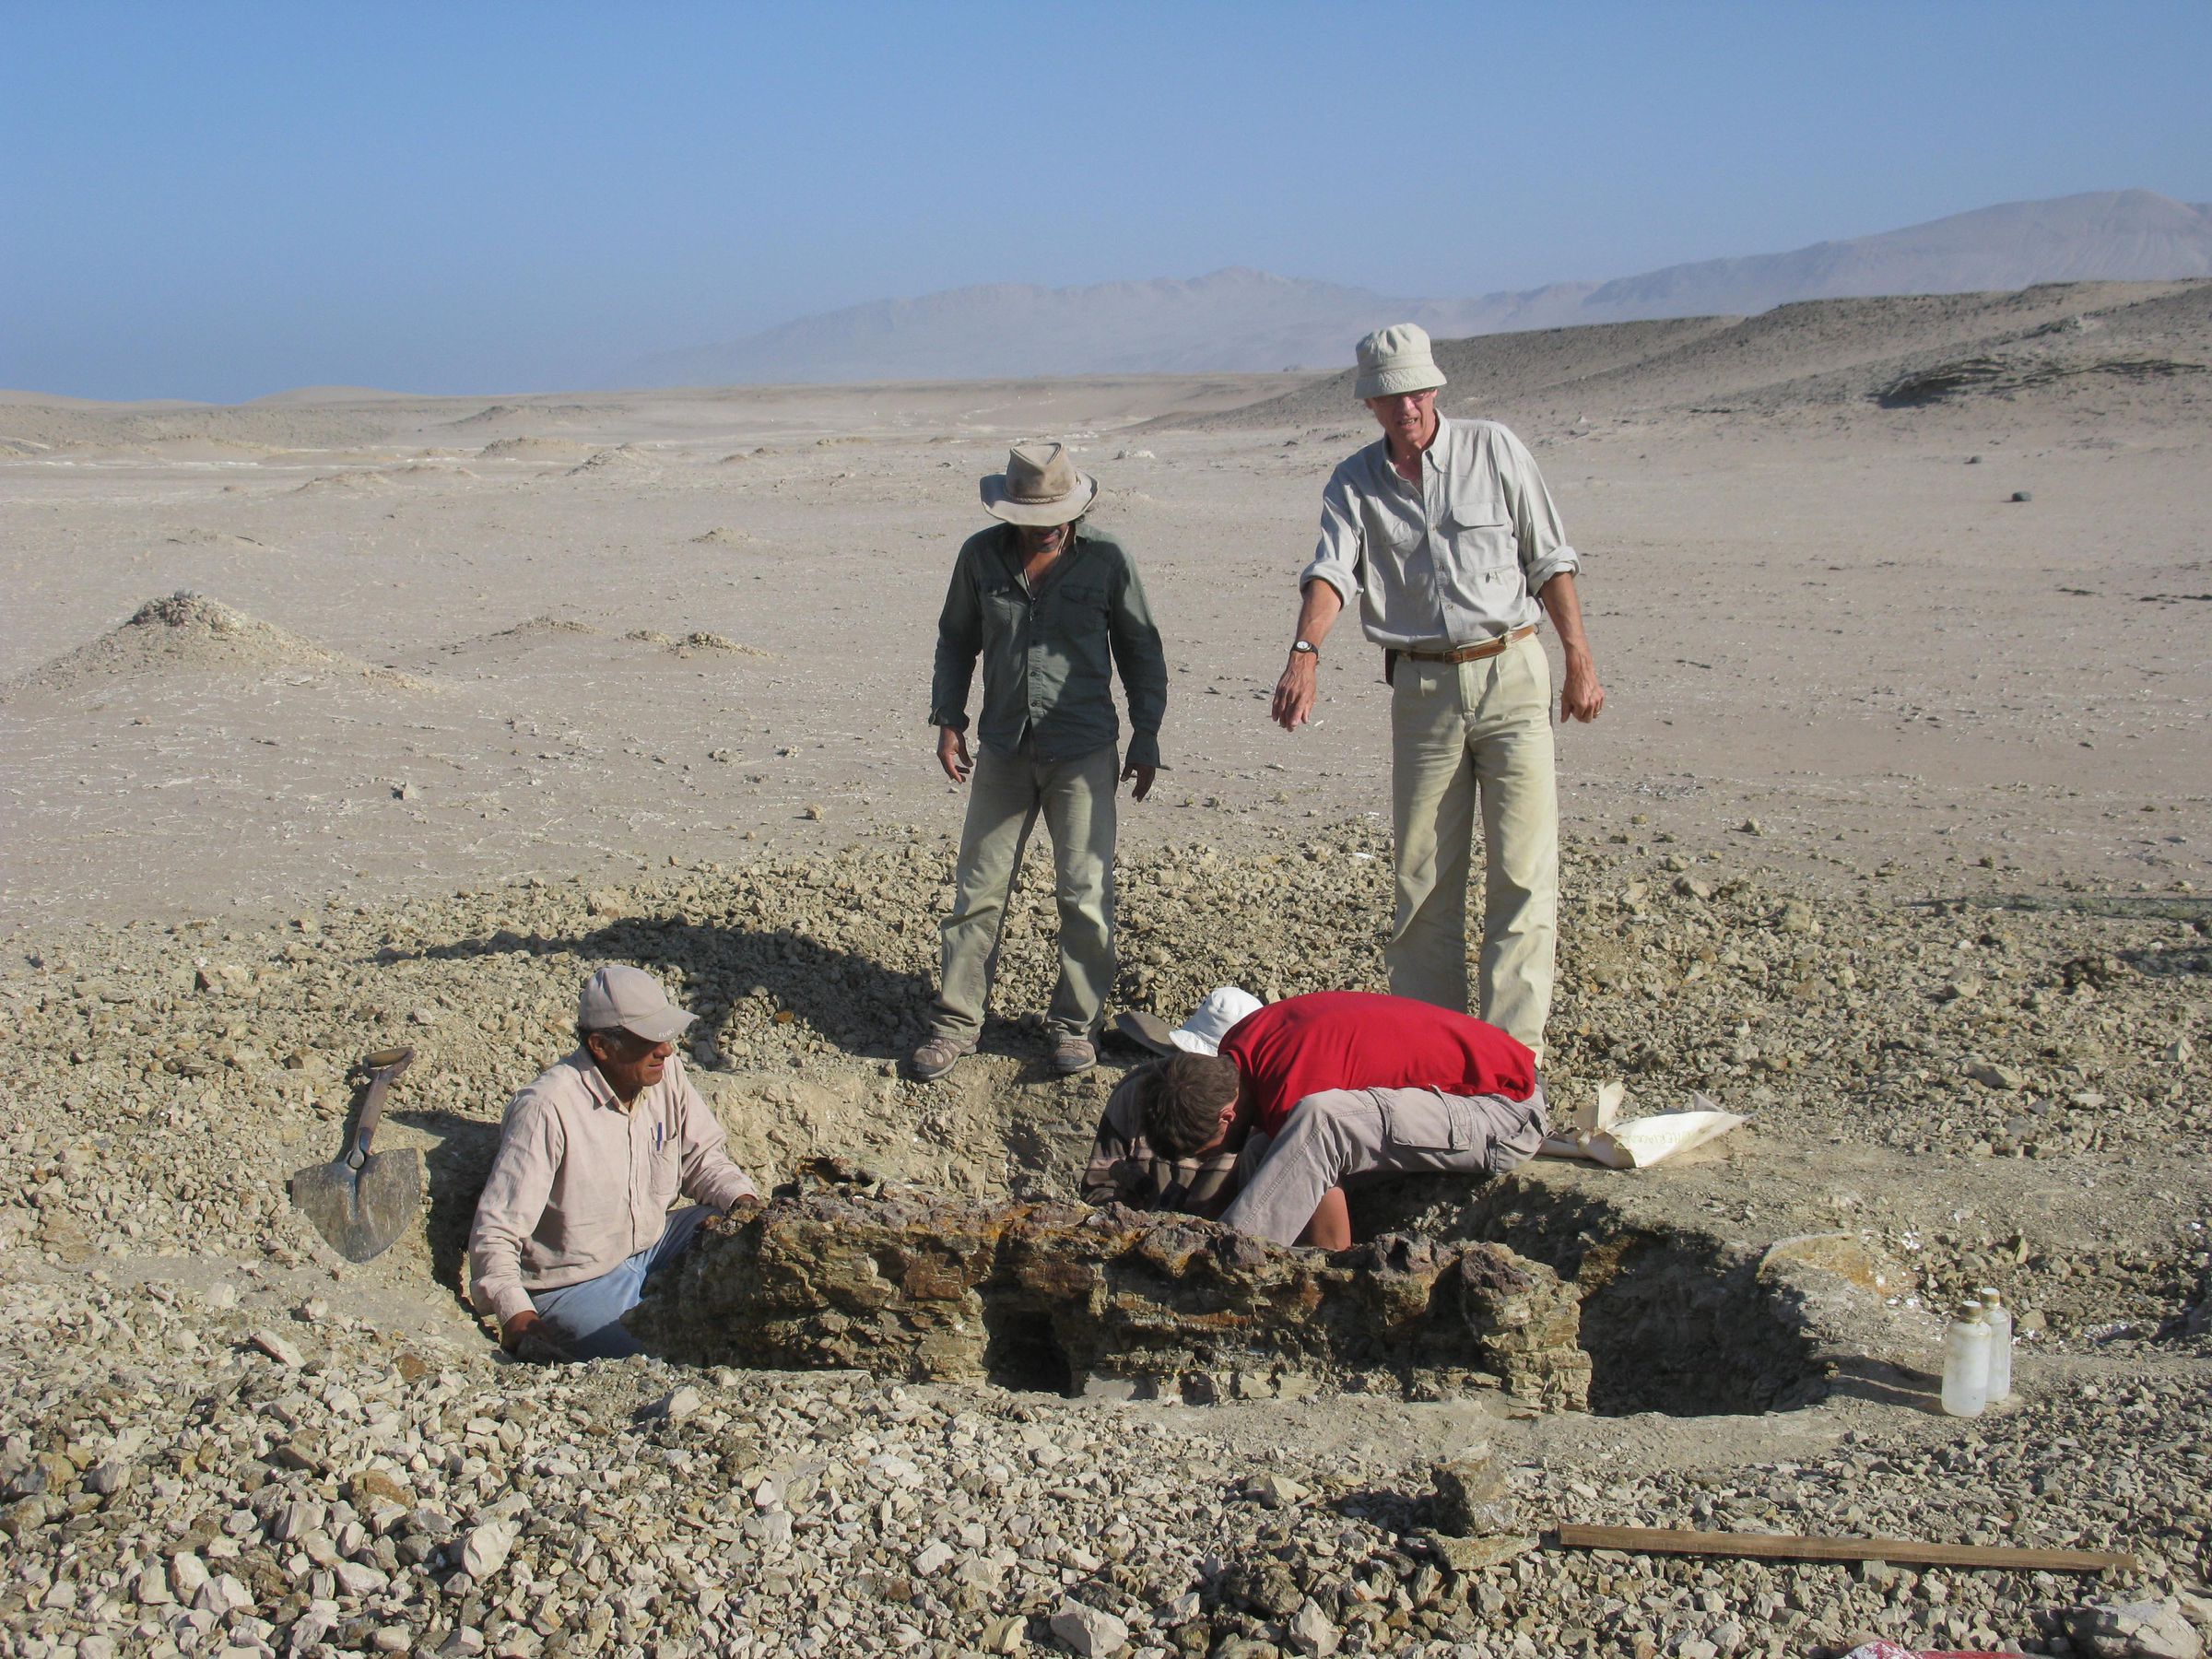 Members of the excavation team digging around the skeleton of Mystacodon selenensis at the Media Luna locality in the Pisco Basin, Peru.